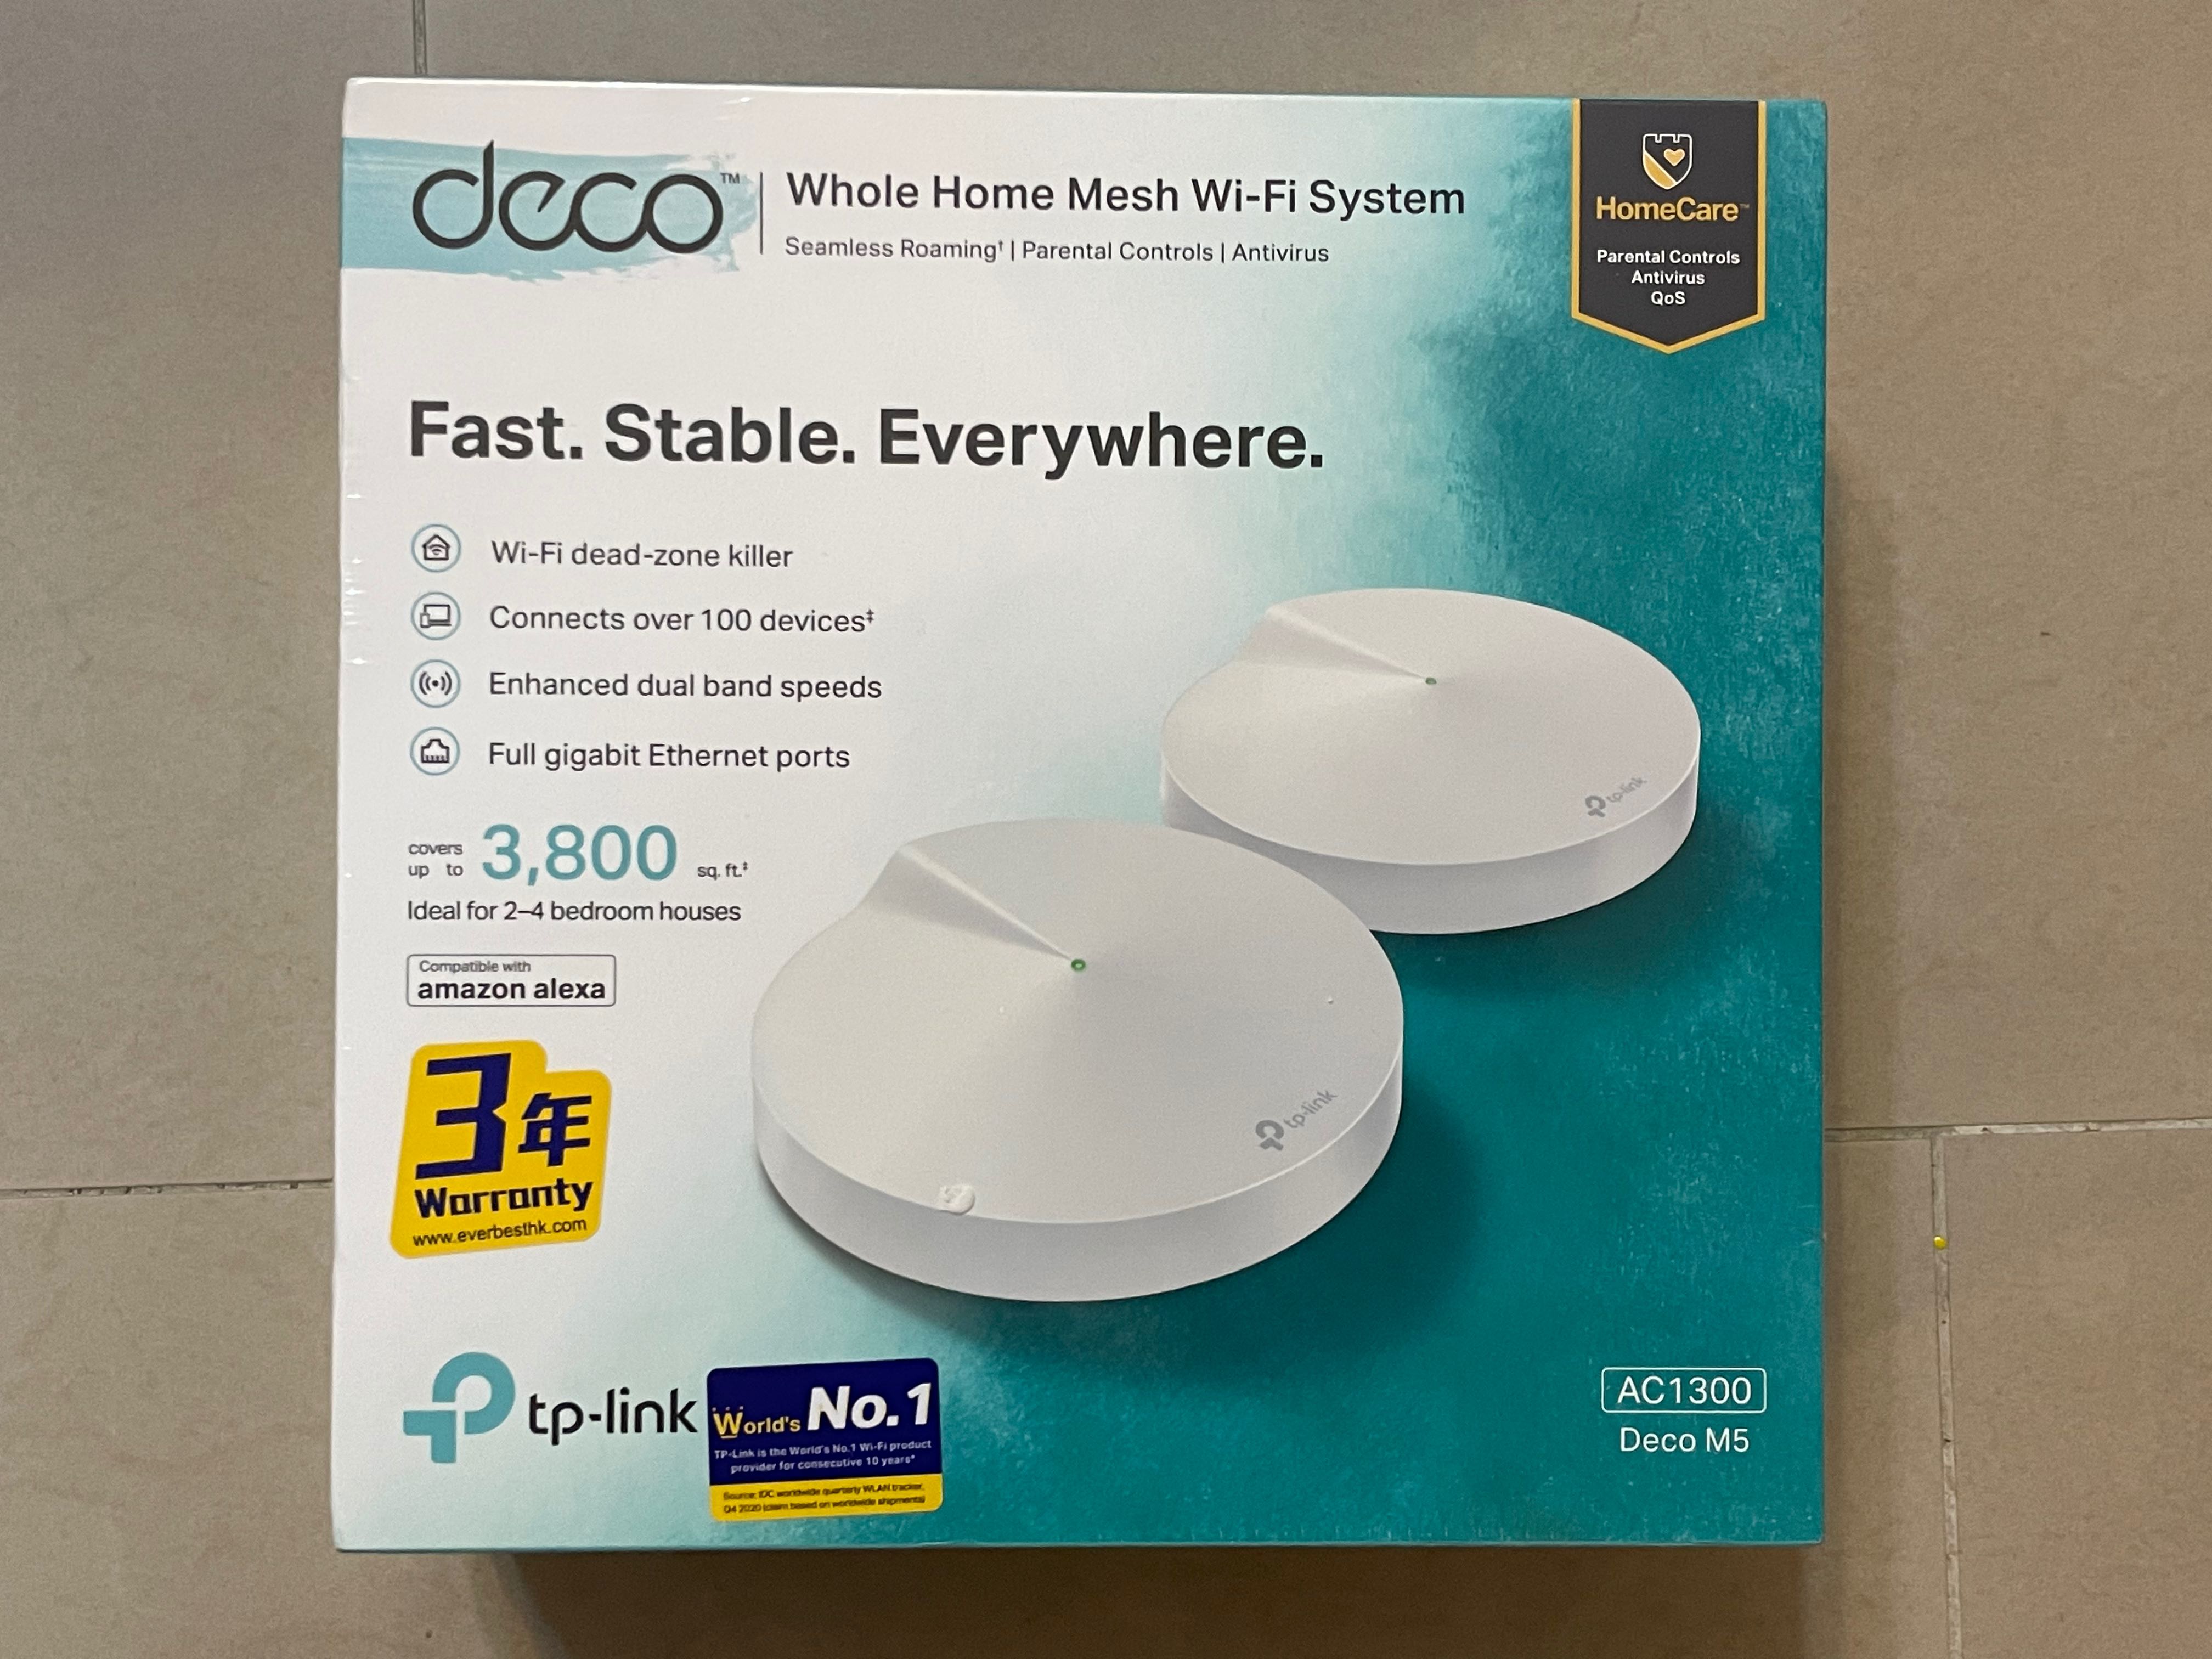 Prime Beangstigend Met andere bands TP-Link AC1300 Whole-Home Wi-Fi Mesh Router Deco M5 (2件裝), 電腦＆ 平板電腦,  電腦周邊產品, Wifi及上網相關產品- Carousell